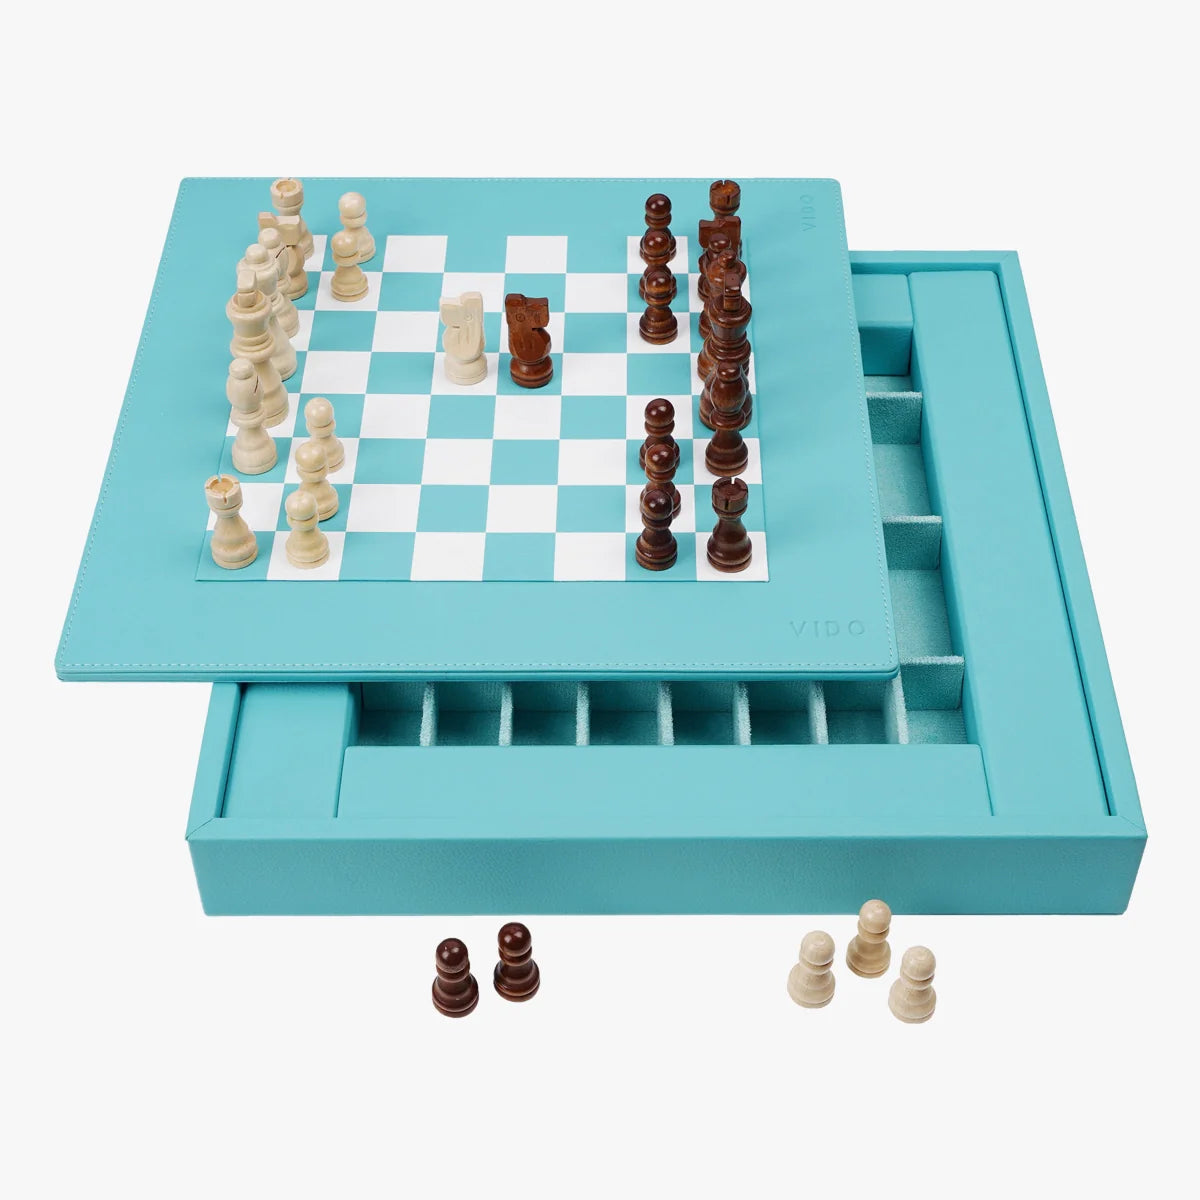 Luxury Chess Box Crafted With Turquoise Vegan Leather - Designed By VIDO